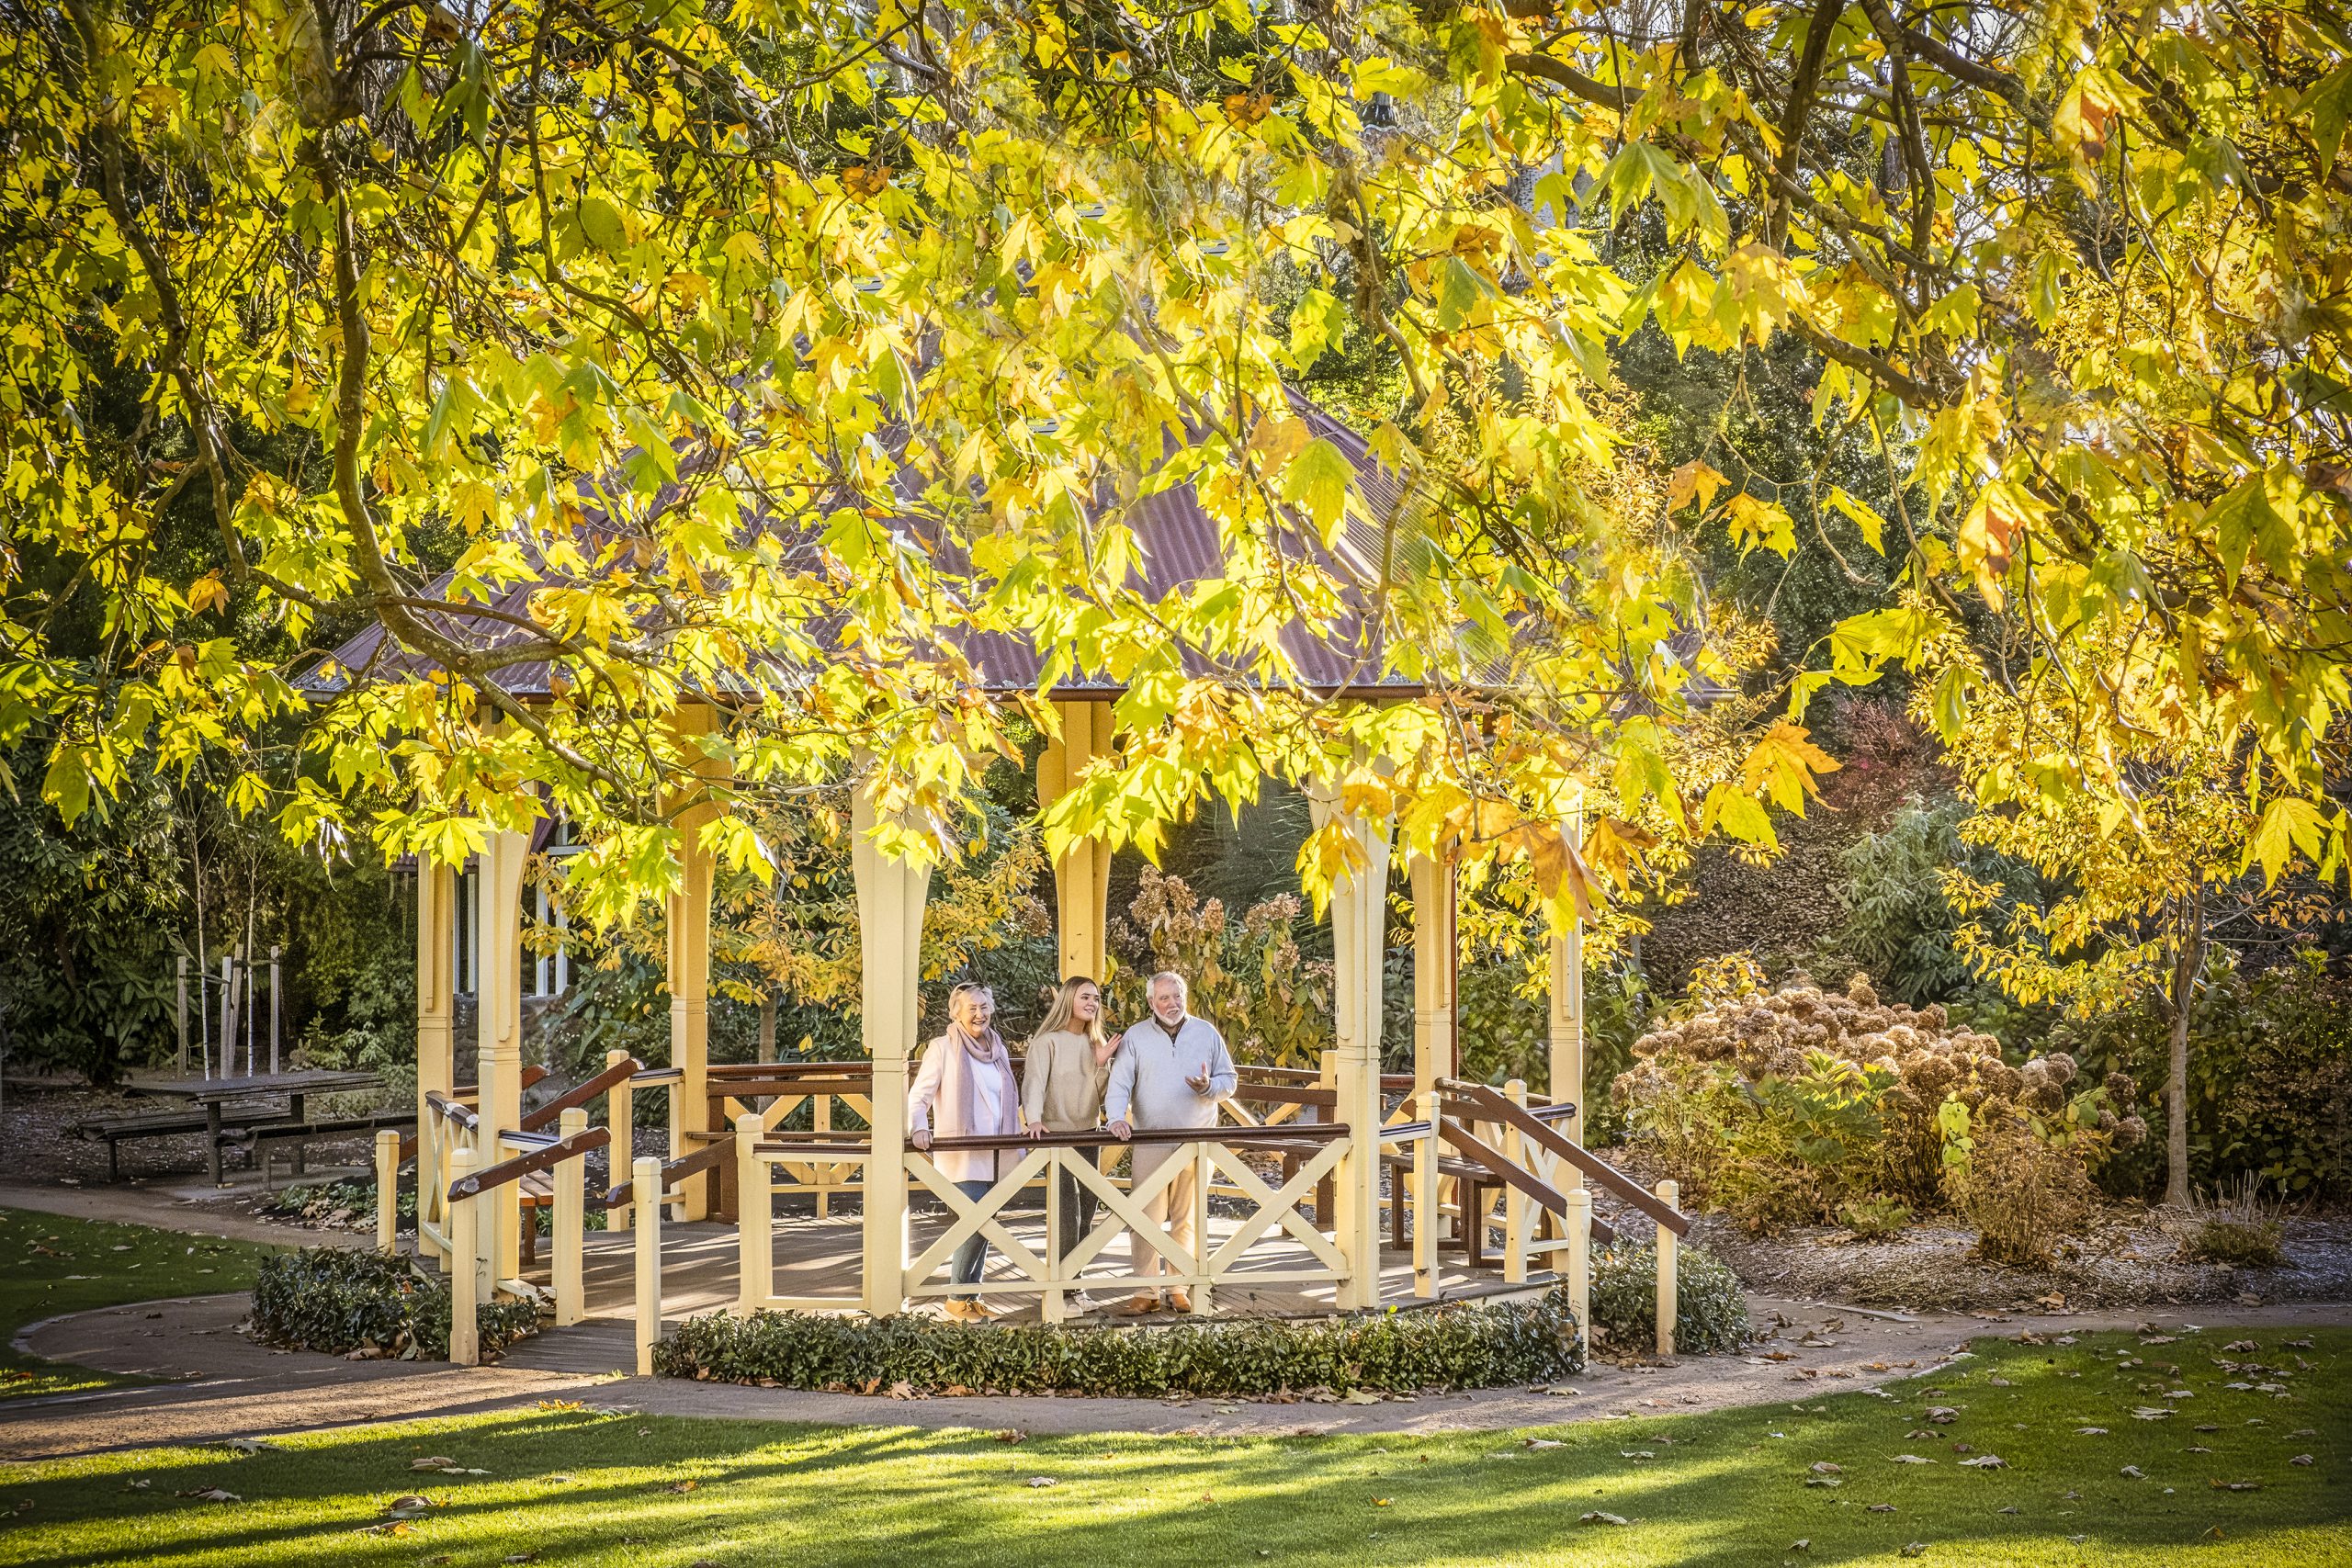 3 people standing in a gazebo under a beautiful tree with bright leaves